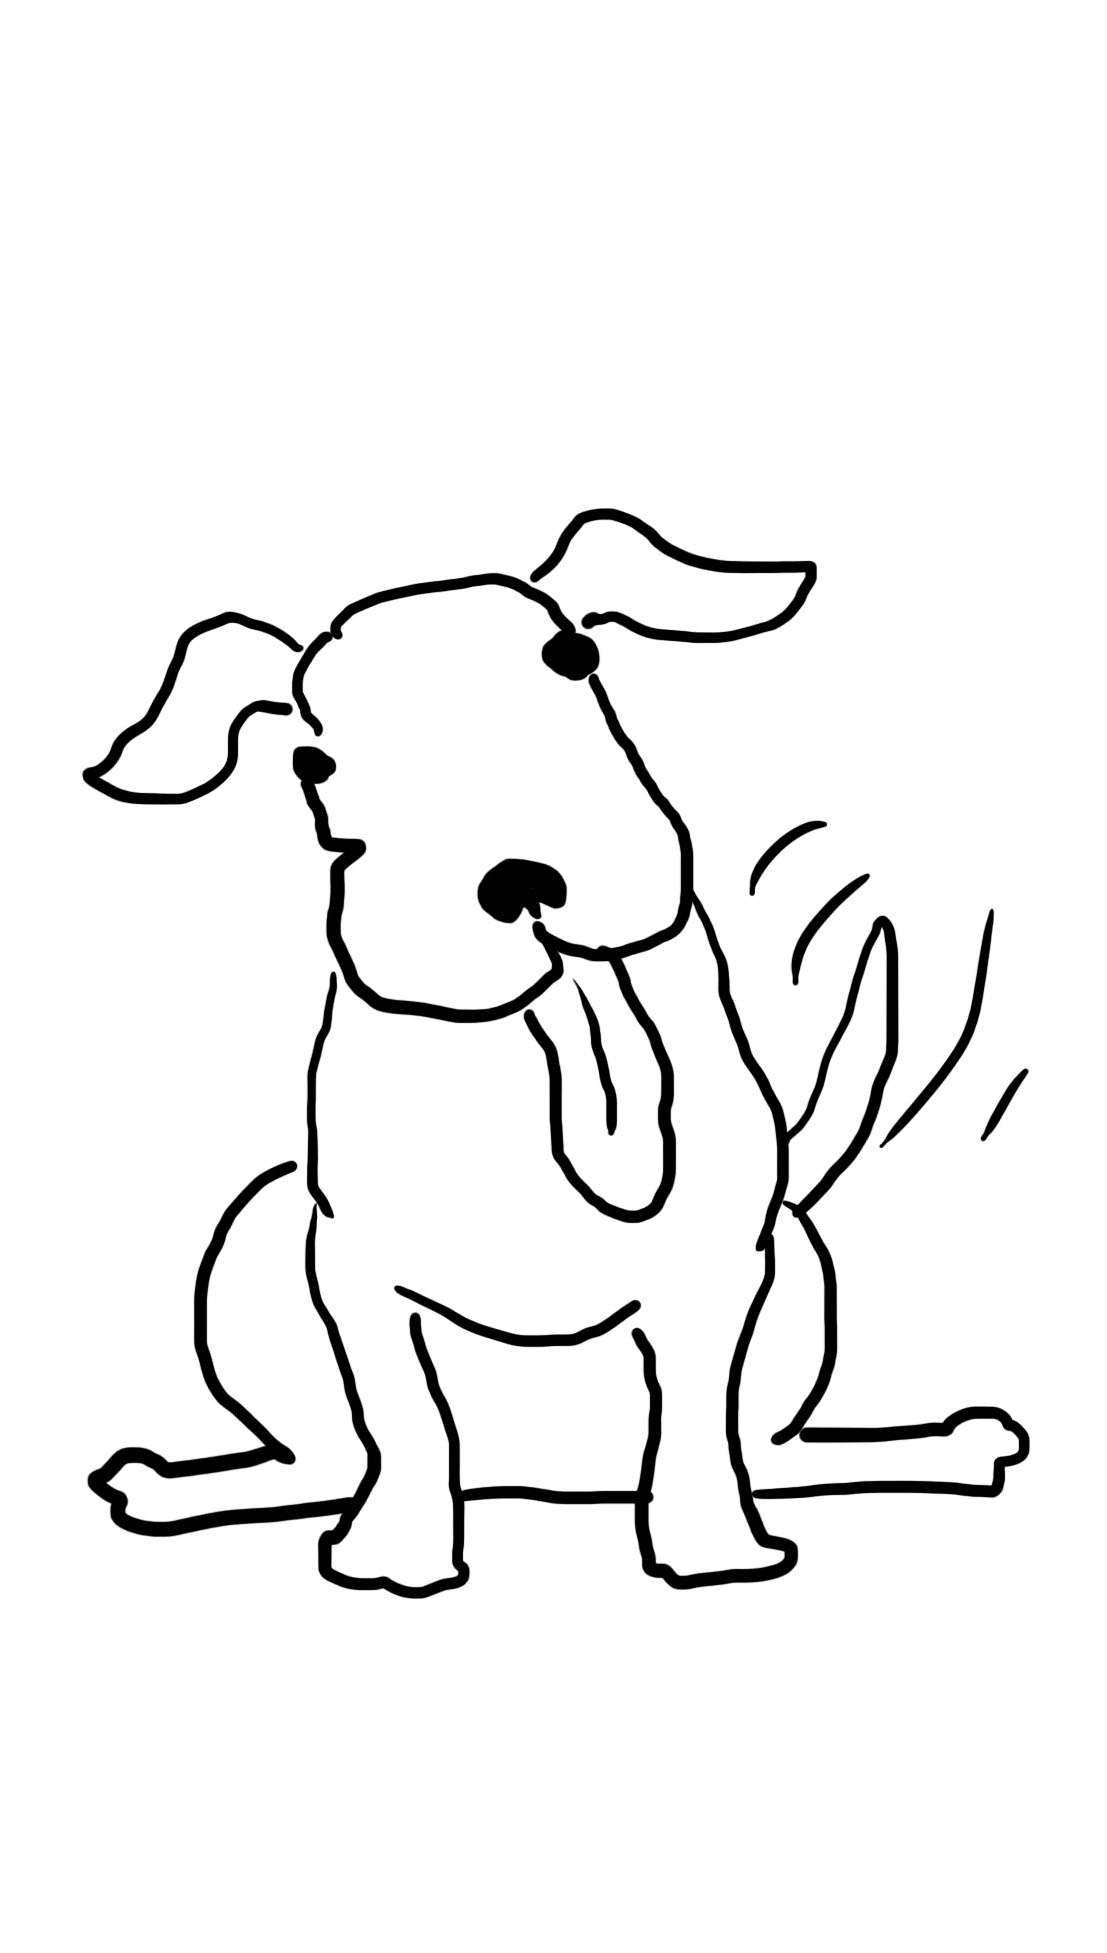 a dog with a bone in its mouth coloring page